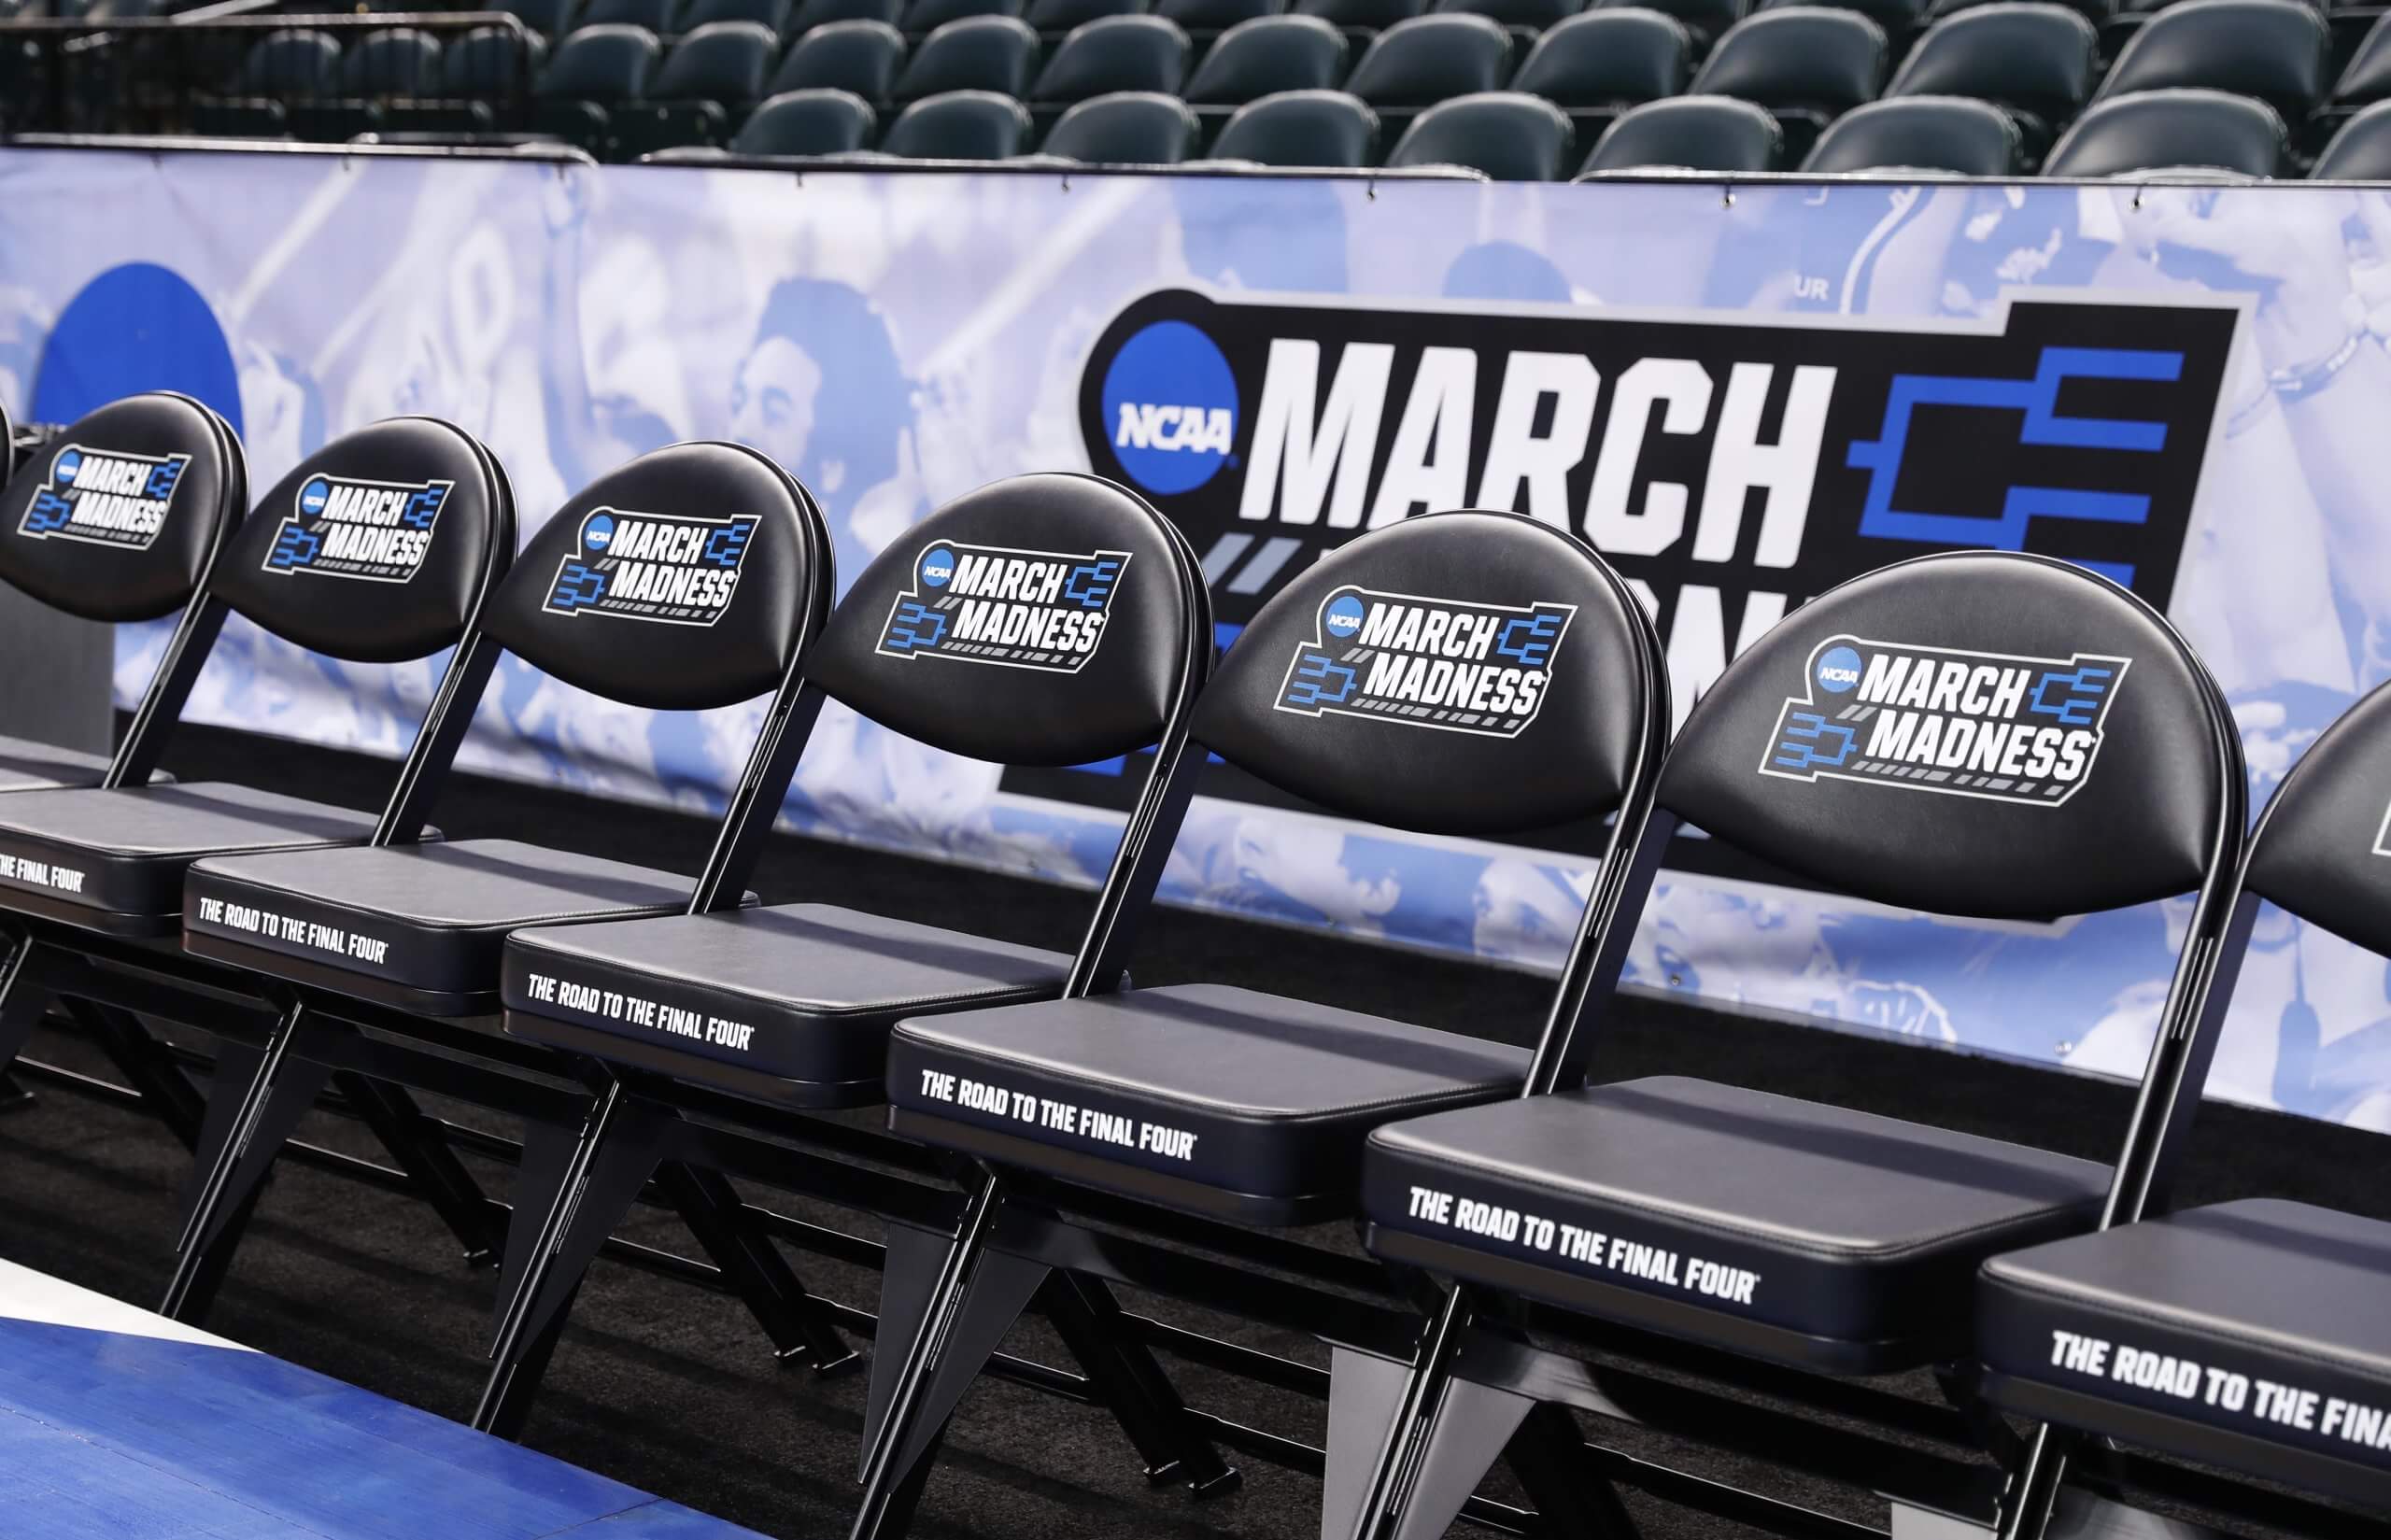 Top Android Apps You Can Use to Watch March Madness